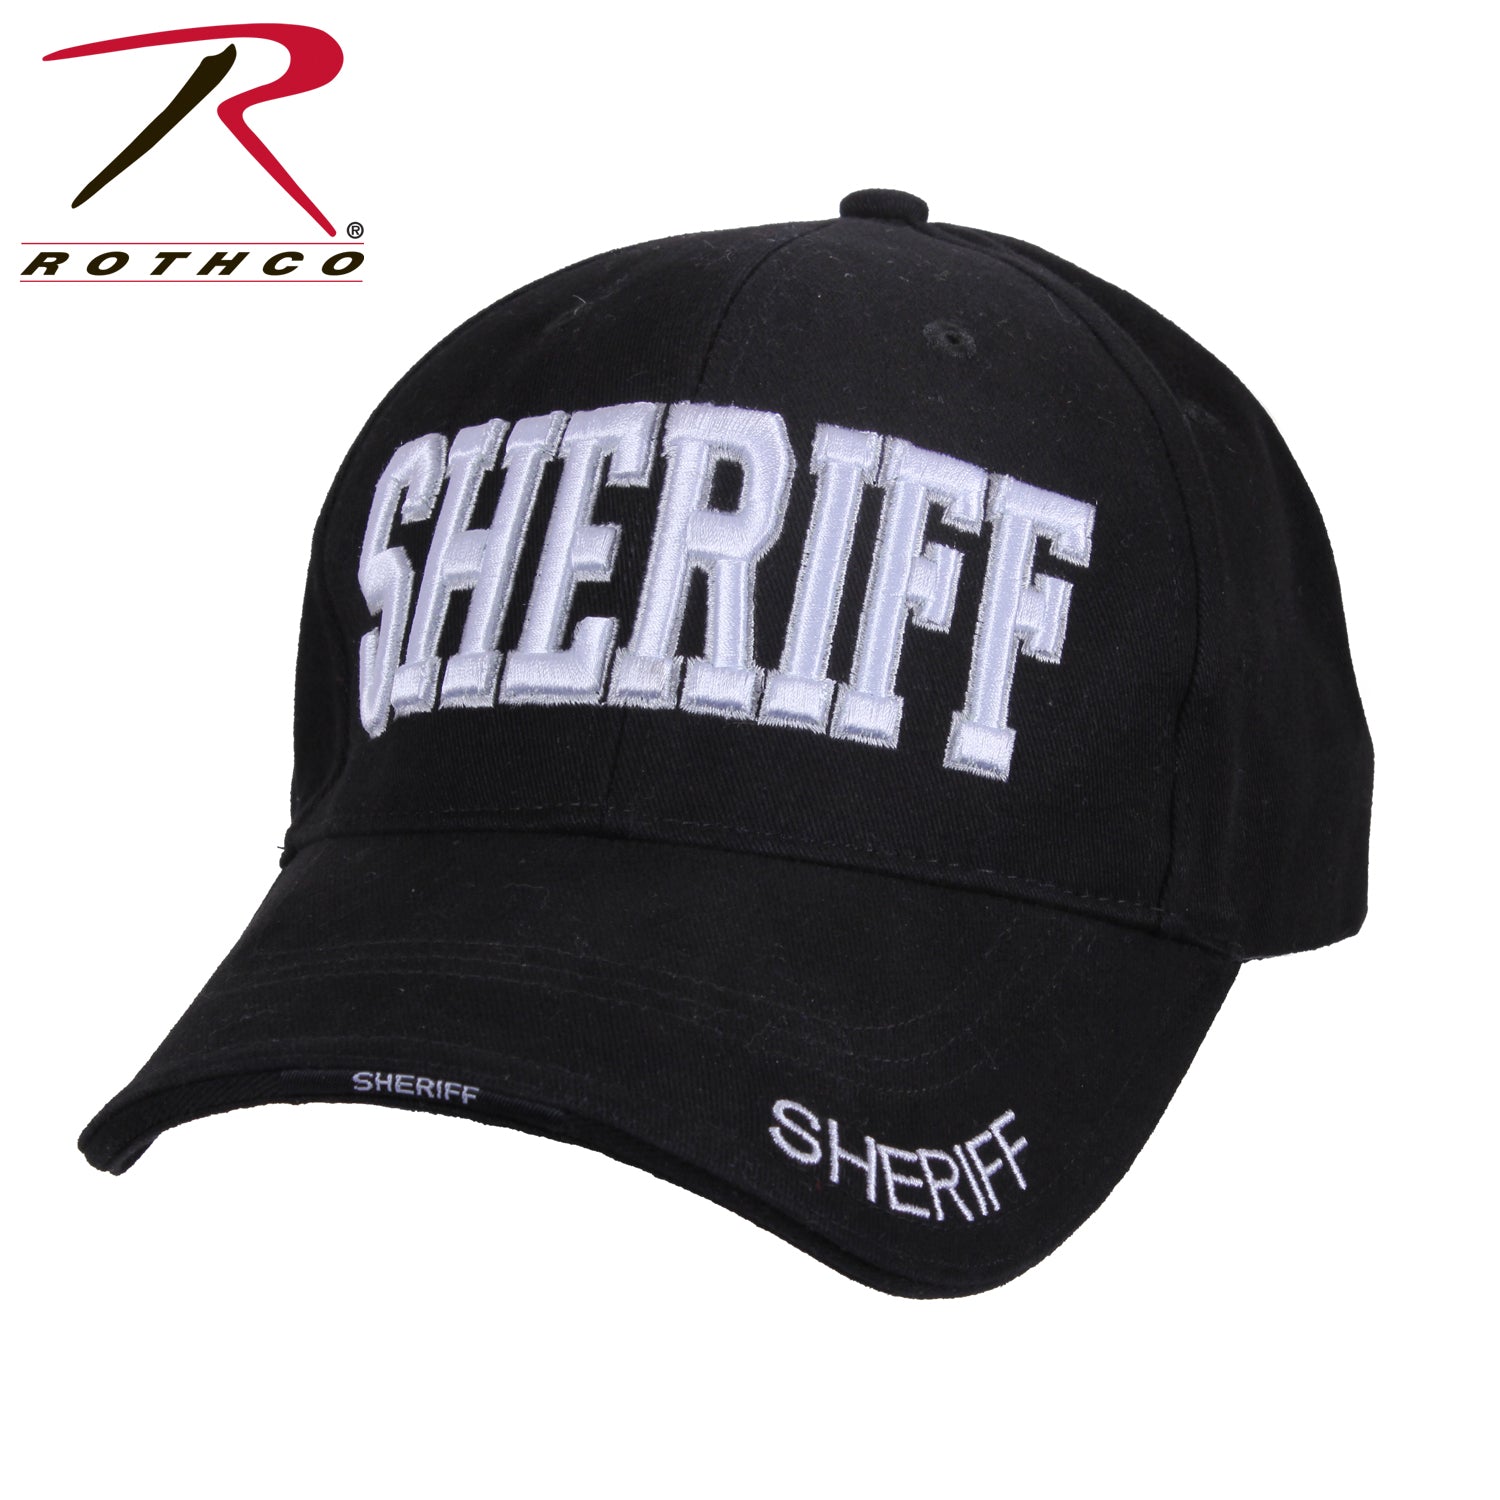 Rothco Sheriff Deluxe Low Profile Cap